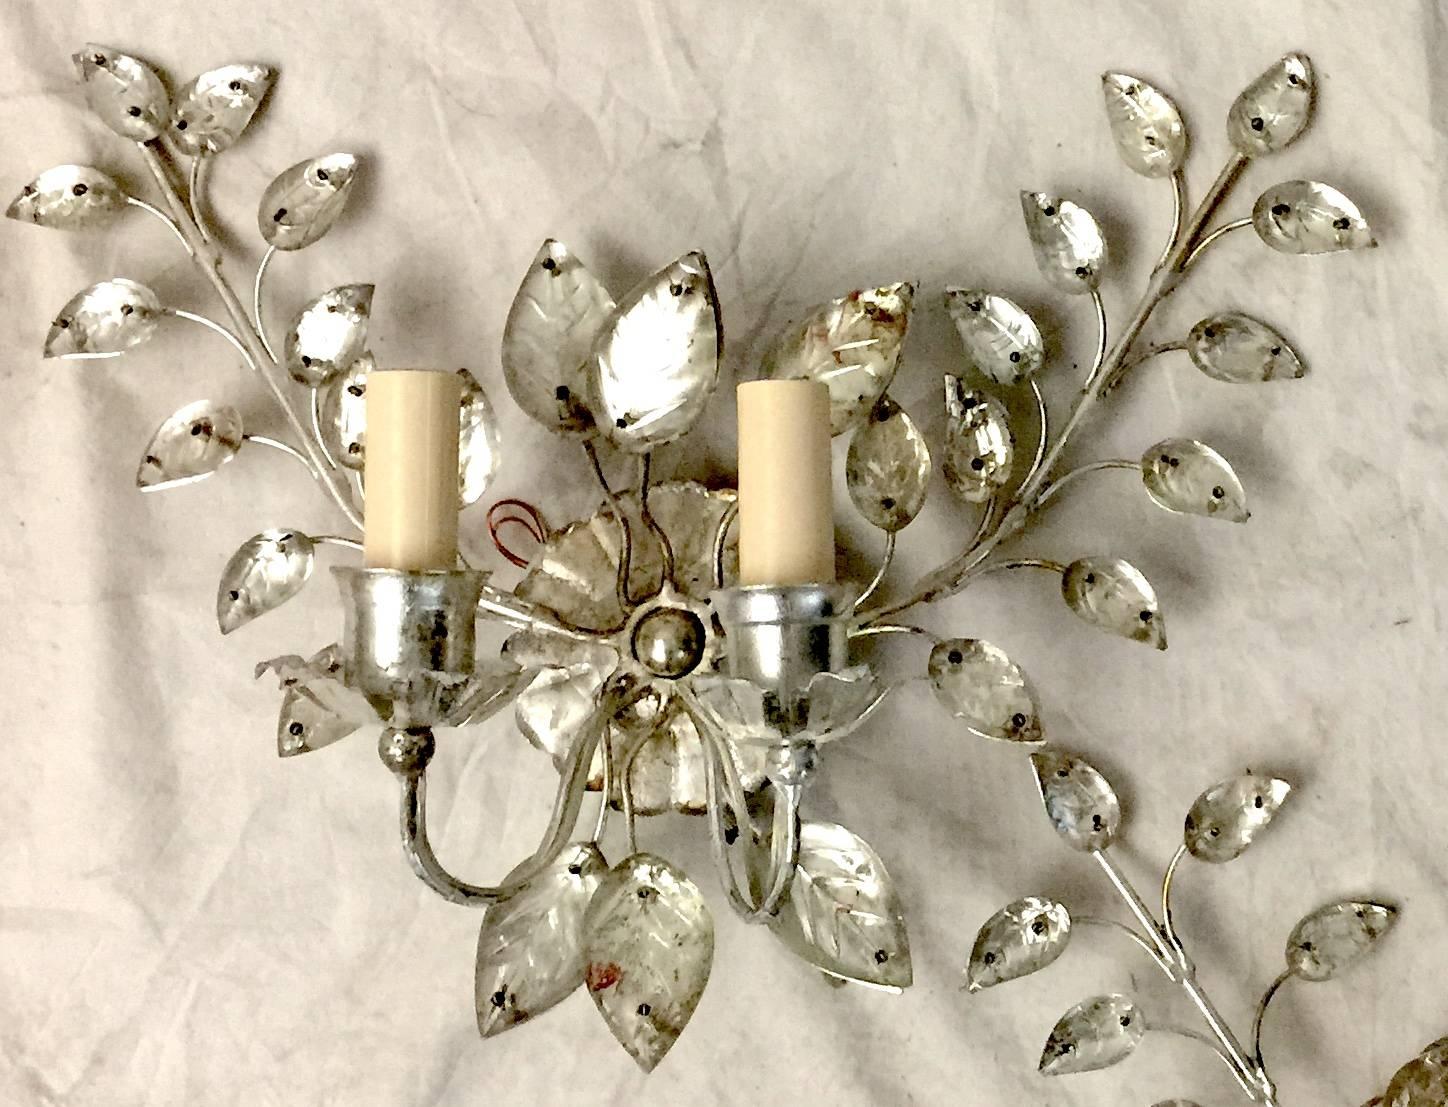 A pair of circa late 1940’s French silver-plated 2-light sconces with glass leaves.

Measurements:
Height: 11″
Width: 14.5″
Projection: 6″